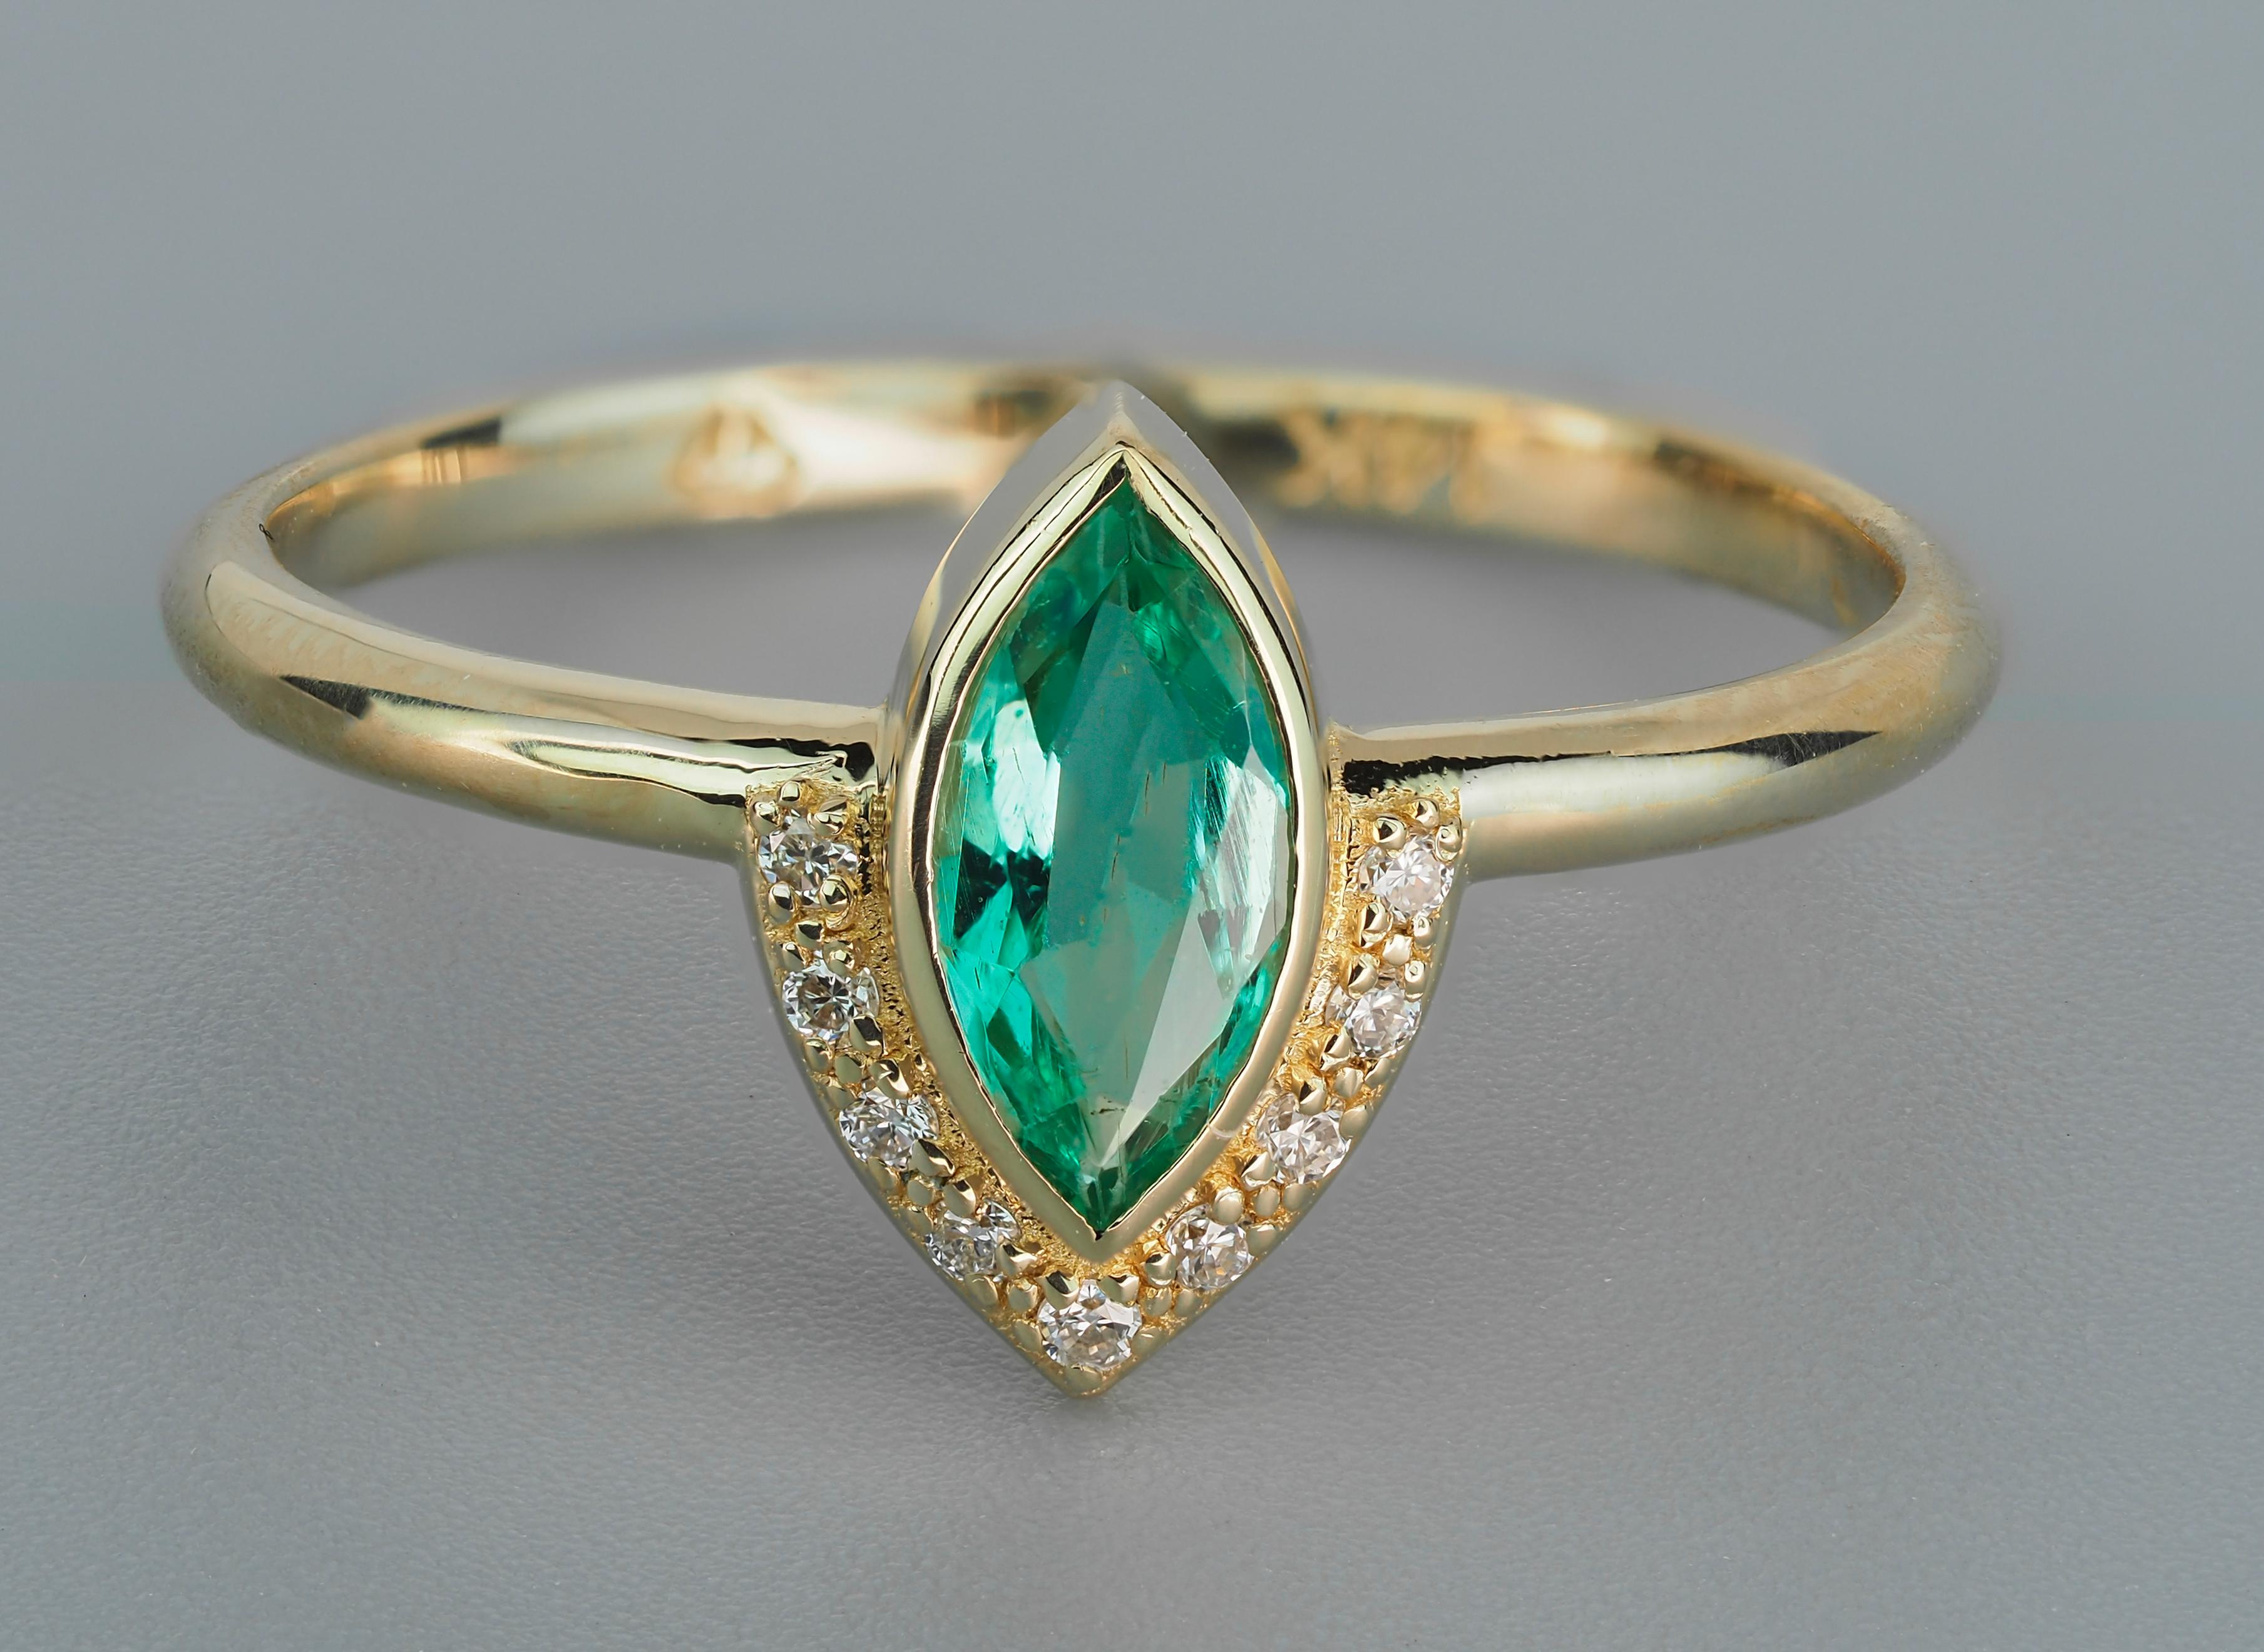 14 kt  gold ring with emerald and diamonds.
Total weight: 1.80 g.
7 US
Set with emerald, color - green
Marquise cut, 0.70 ct. in total.
Clarity: Transparent with inclusions
Surrounding stone - diamonds 0.09 ct (9 x 0.01 ct), F/VS, round brilliant